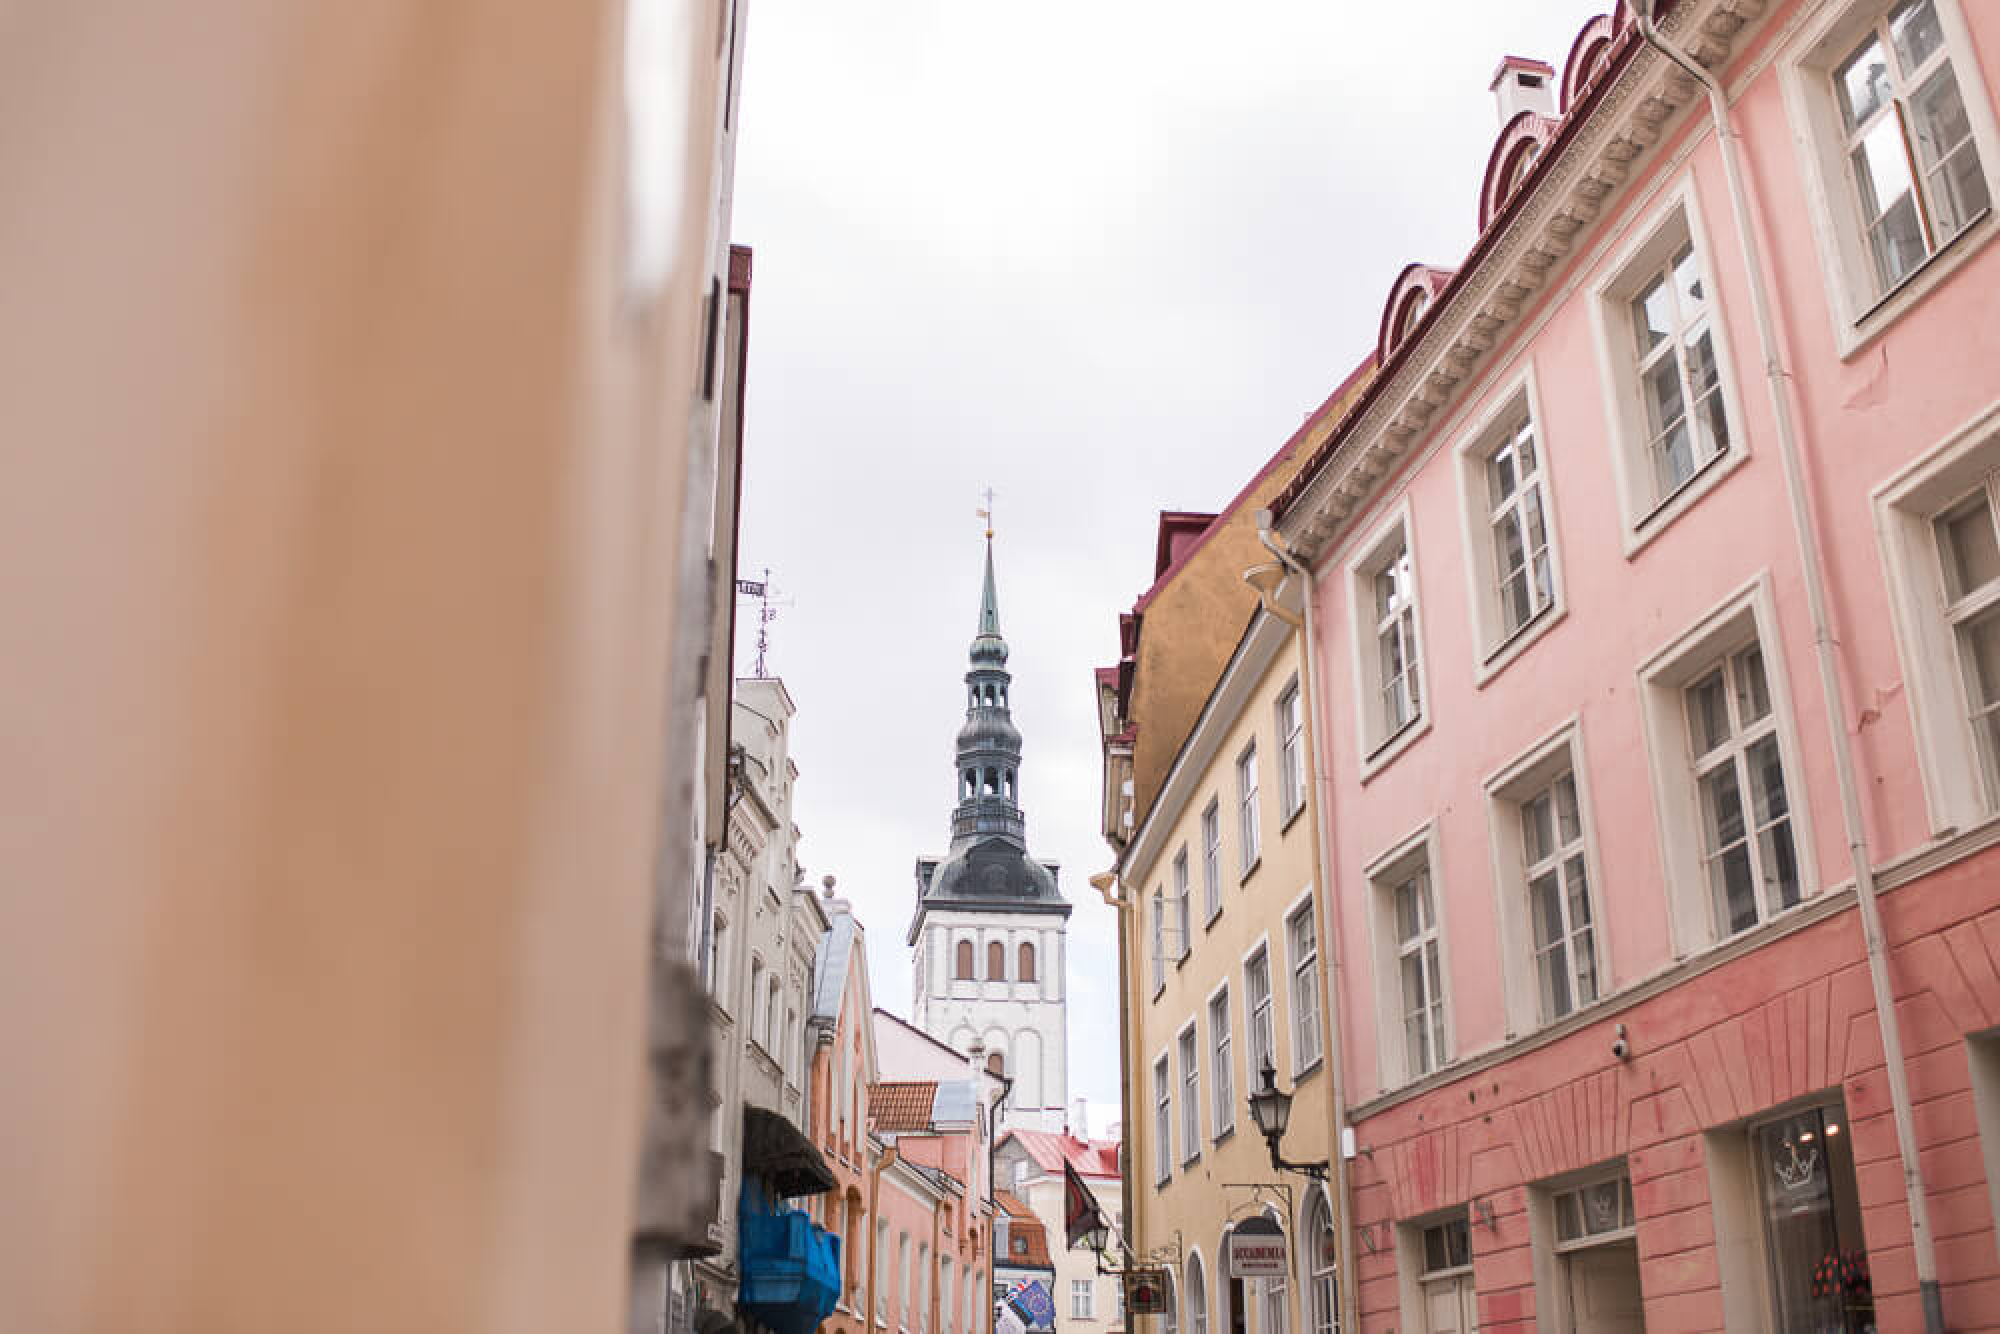 SIX CITIES IN SEVEN DAYS: TALLIN, ST. PETERSBOURG AND HELSINKI